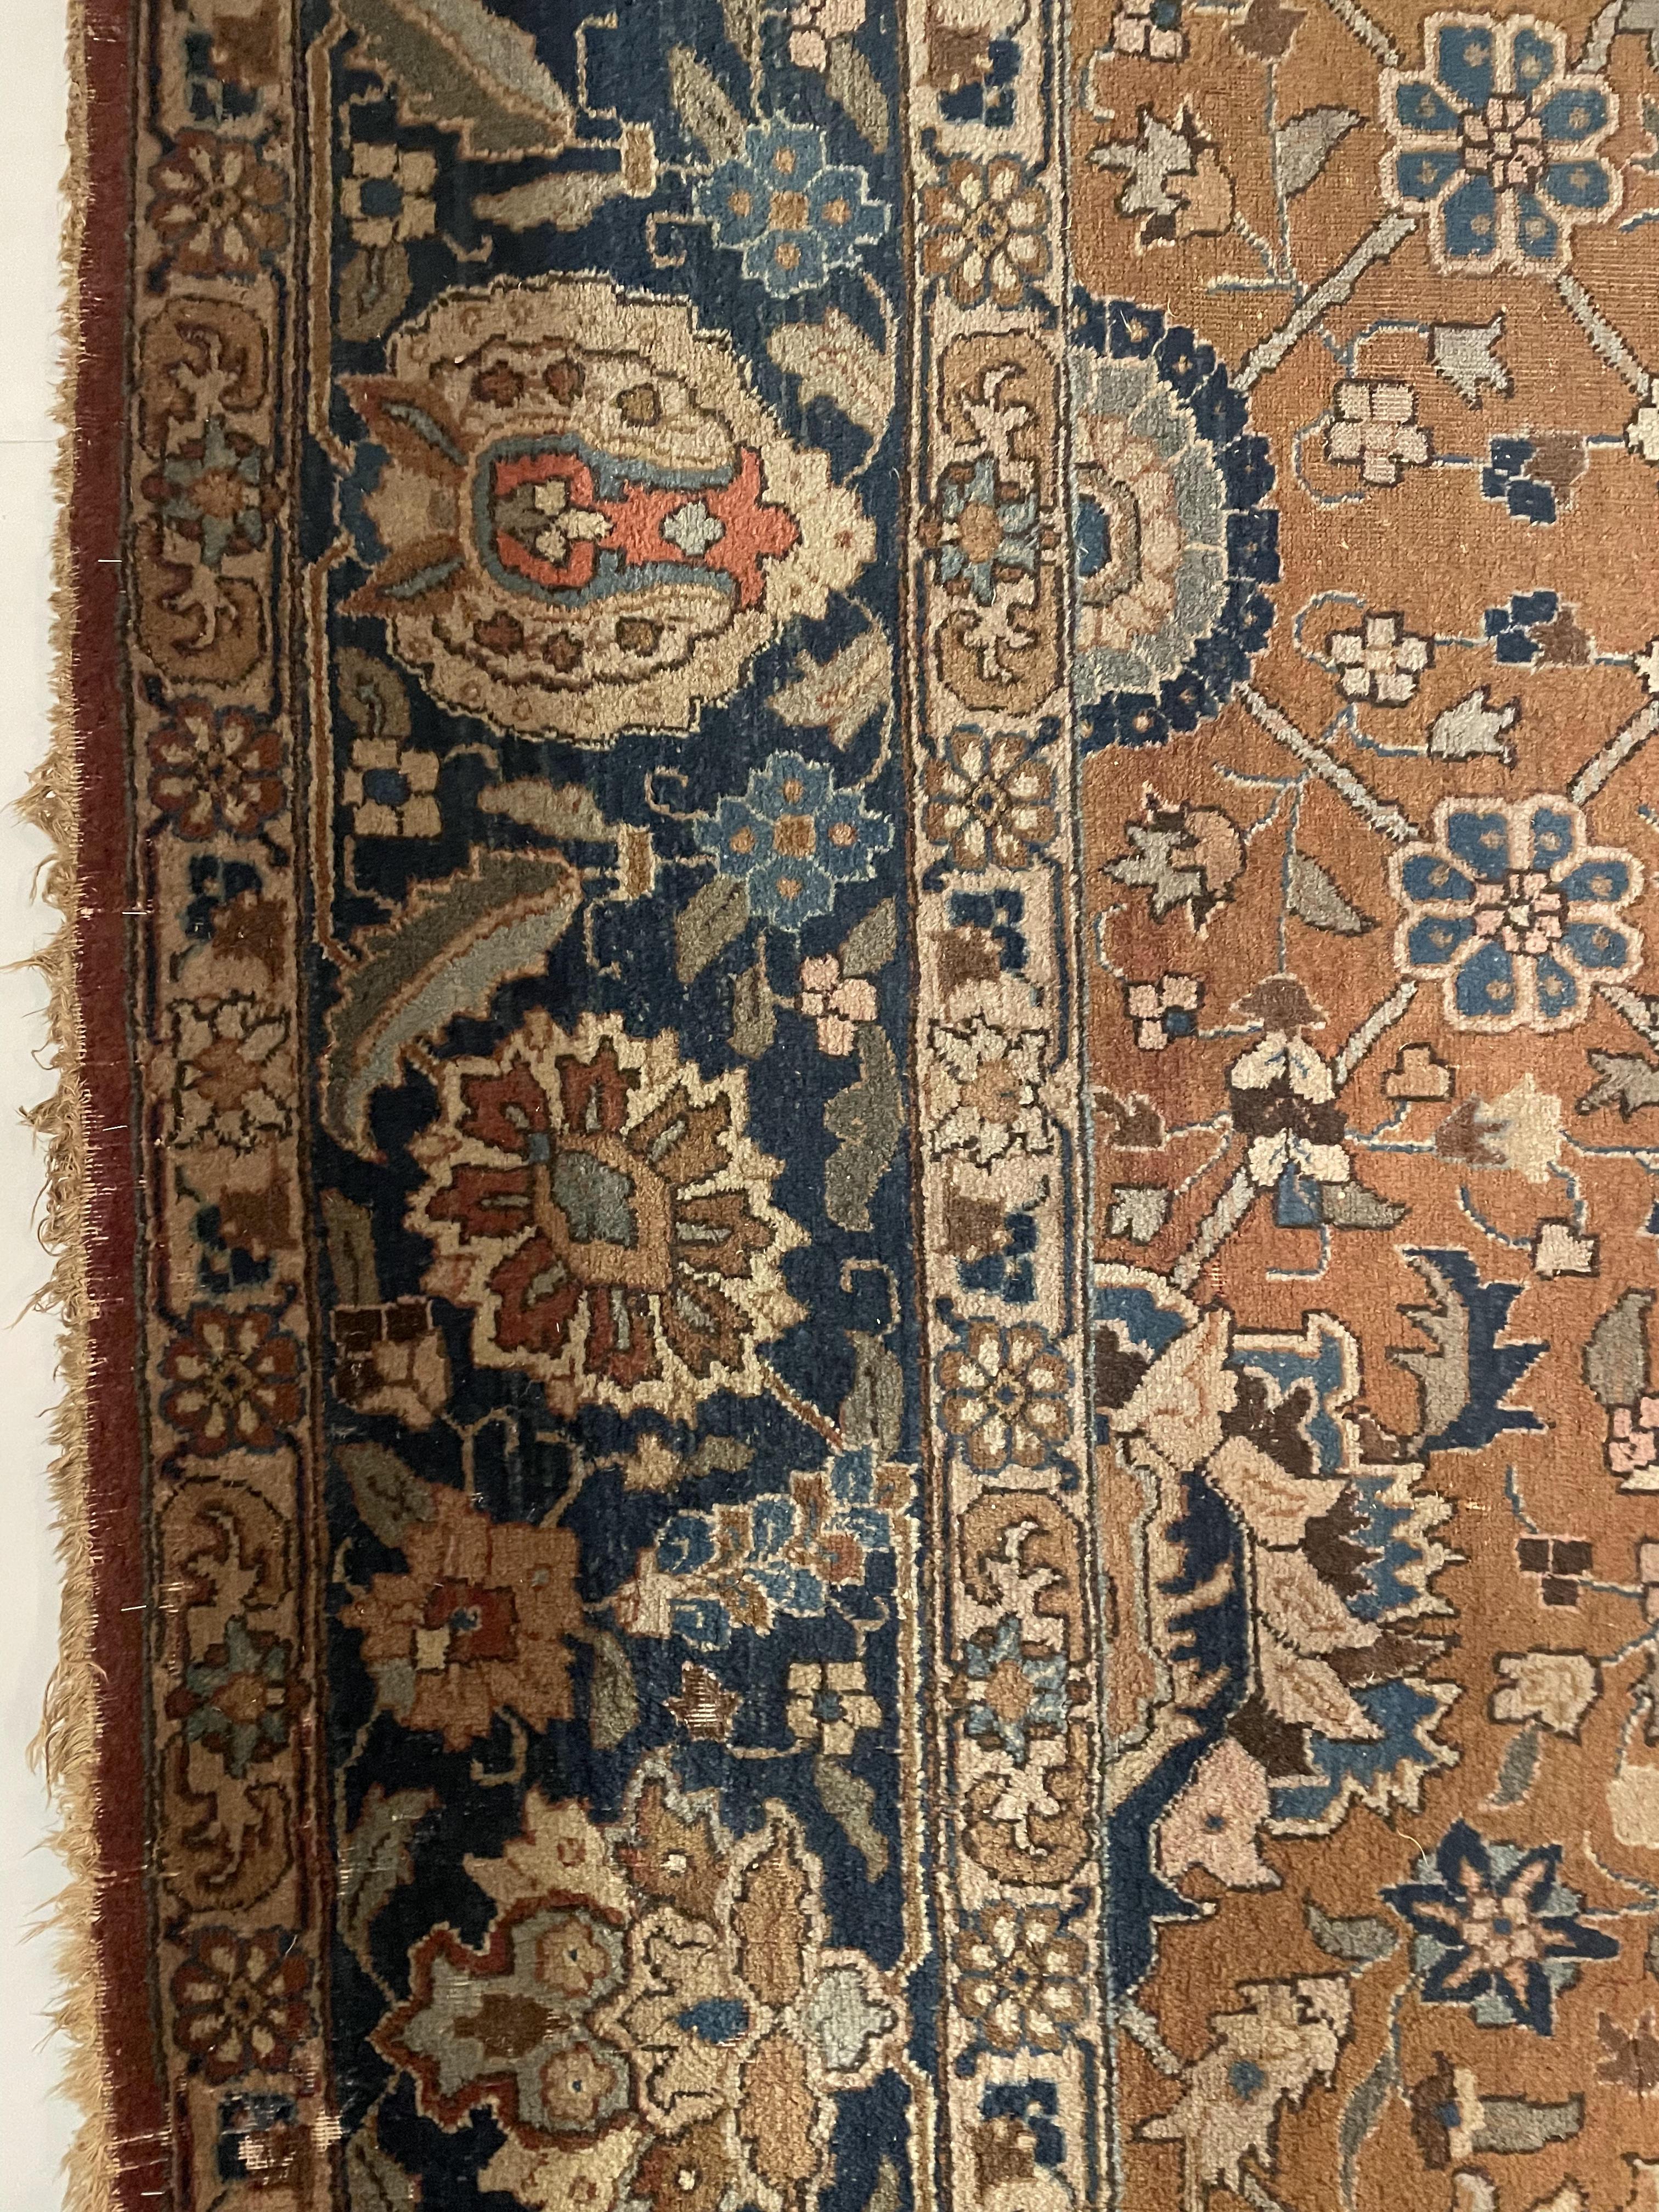 Woven Persian Carpet For Sale